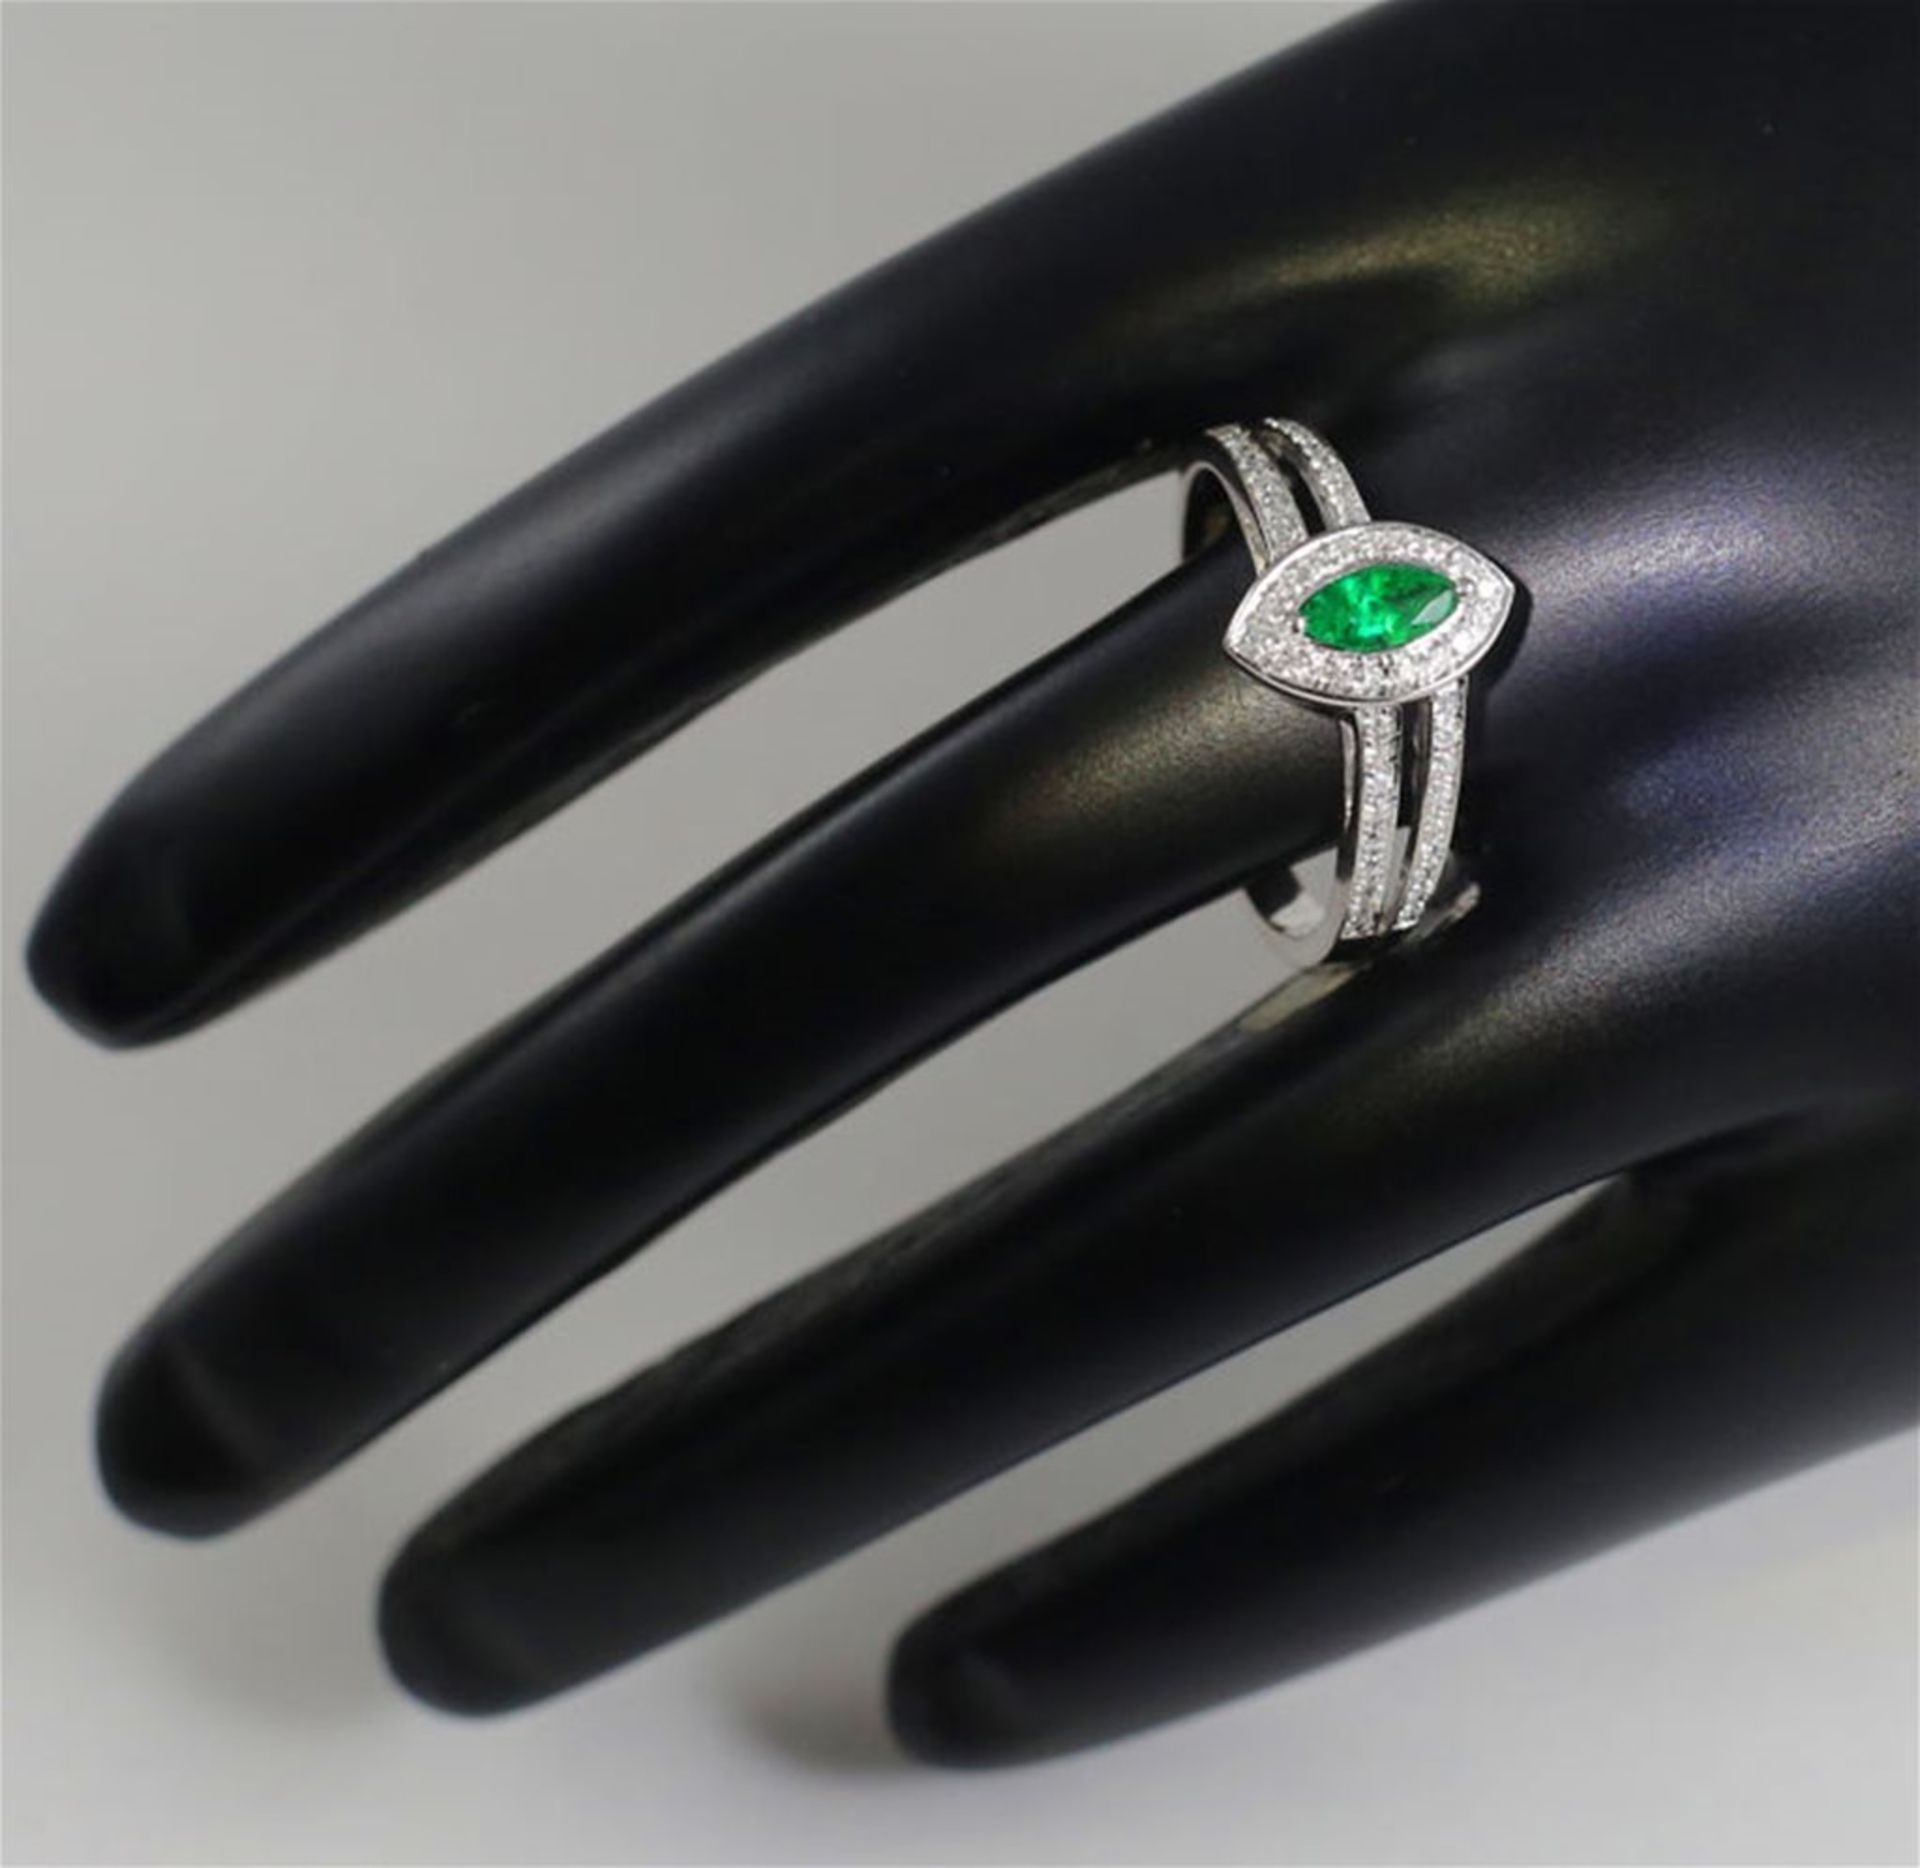 18 K / 750 White Gold Emerald and Diamond Ring - Image 2 of 6